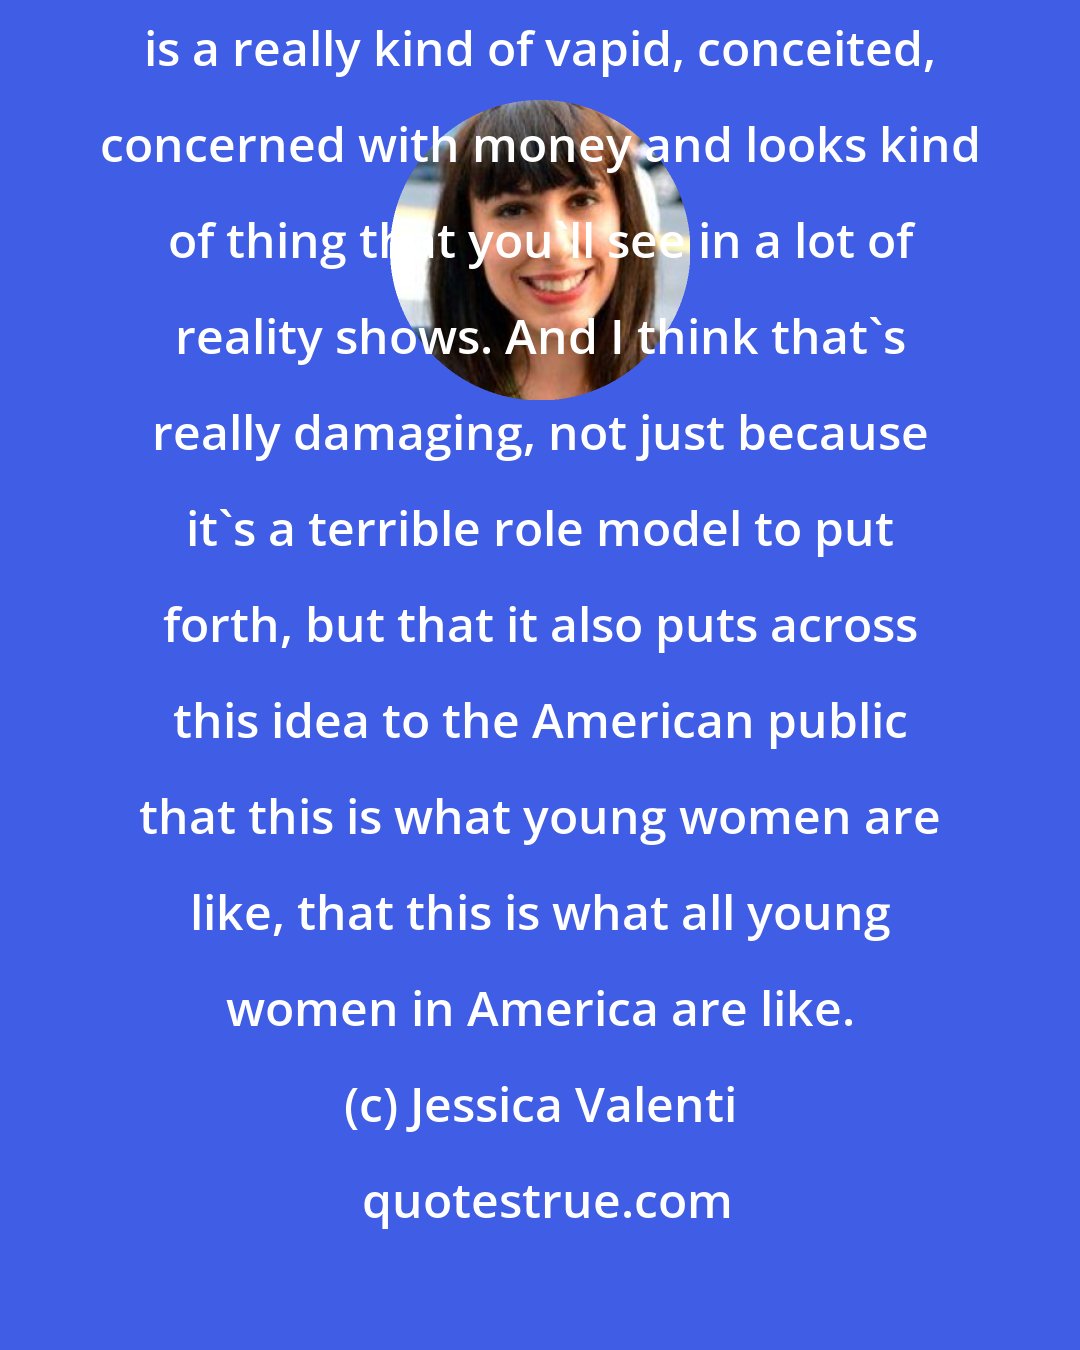 Jessica Valenti: I think that the ideal of young womanhood as it's seen in pop culture specifically is a really kind of vapid, conceited, concerned with money and looks kind of thing that you'll see in a lot of reality shows. And I think that's really damaging, not just because it's a terrible role model to put forth, but that it also puts across this idea to the American public that this is what young women are like, that this is what all young women in America are like.